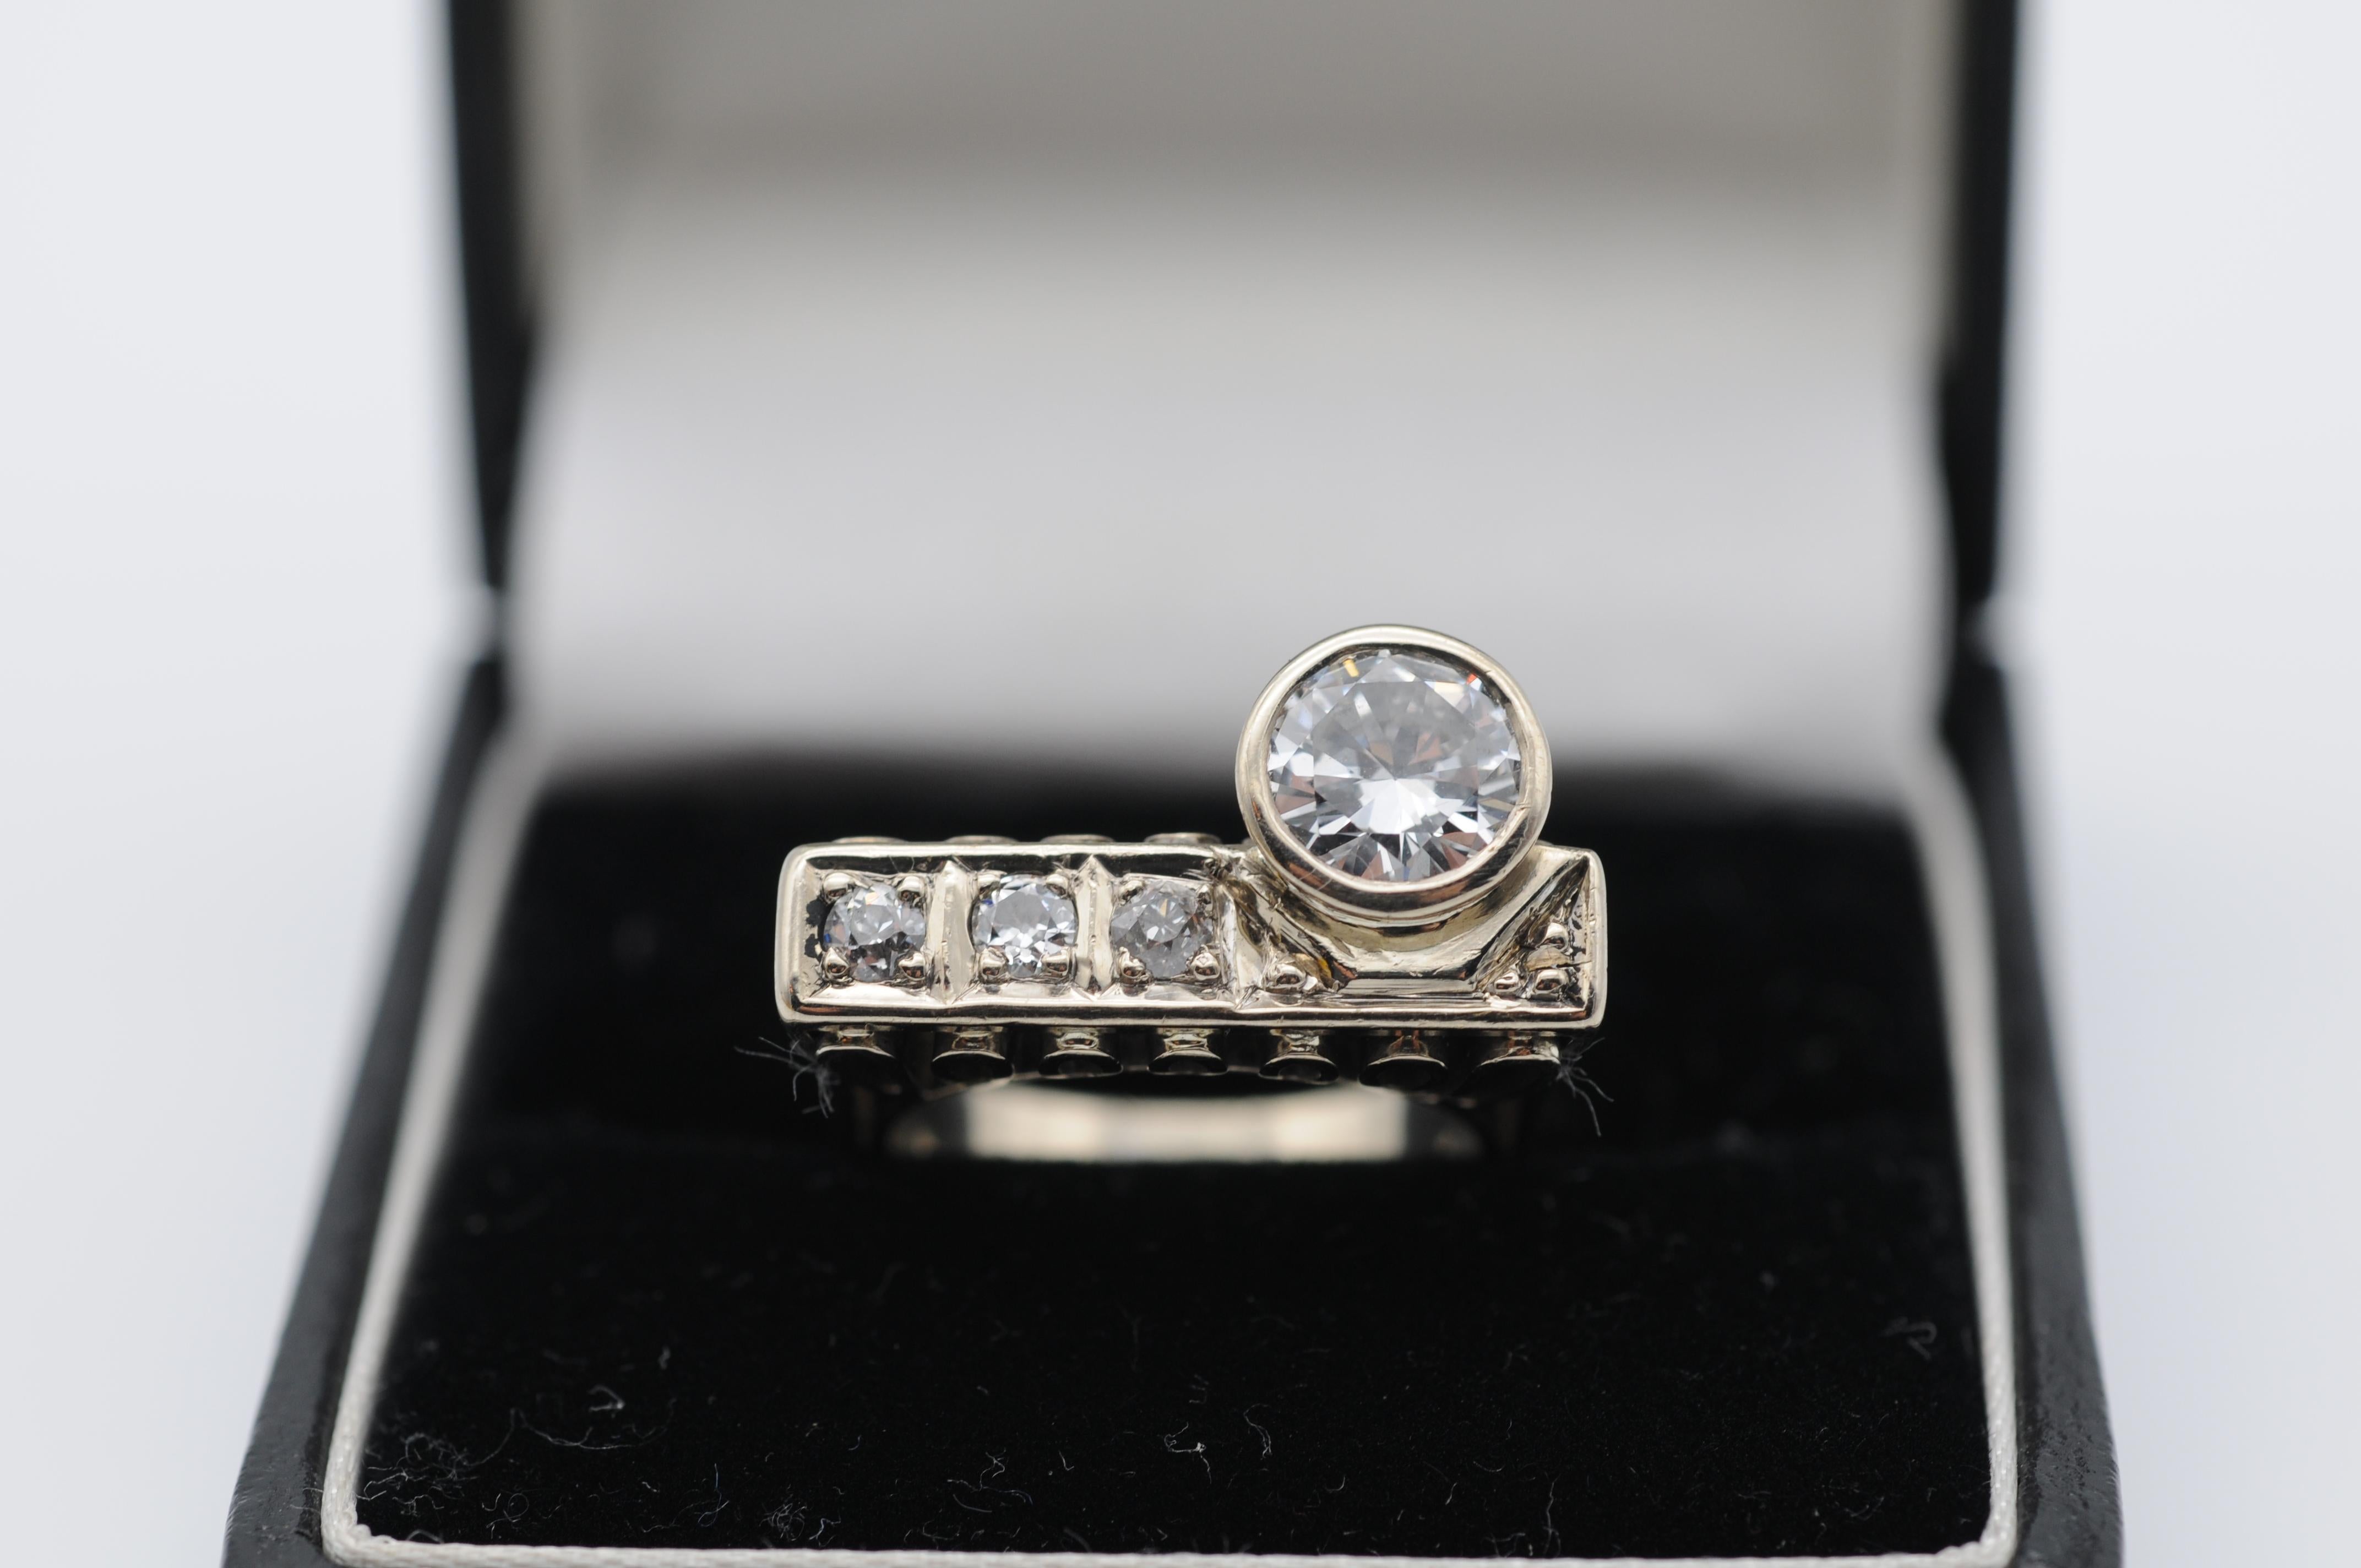 Indulge in the epitome of sophistication and luxury with this exquisite 1.10 carat solitaire brilliant ring in 14K white gold. The ring boasts a stunning 1.10 carat diamond, expertly crafted to maximize its brilliance and fire. With a clarity of VVS